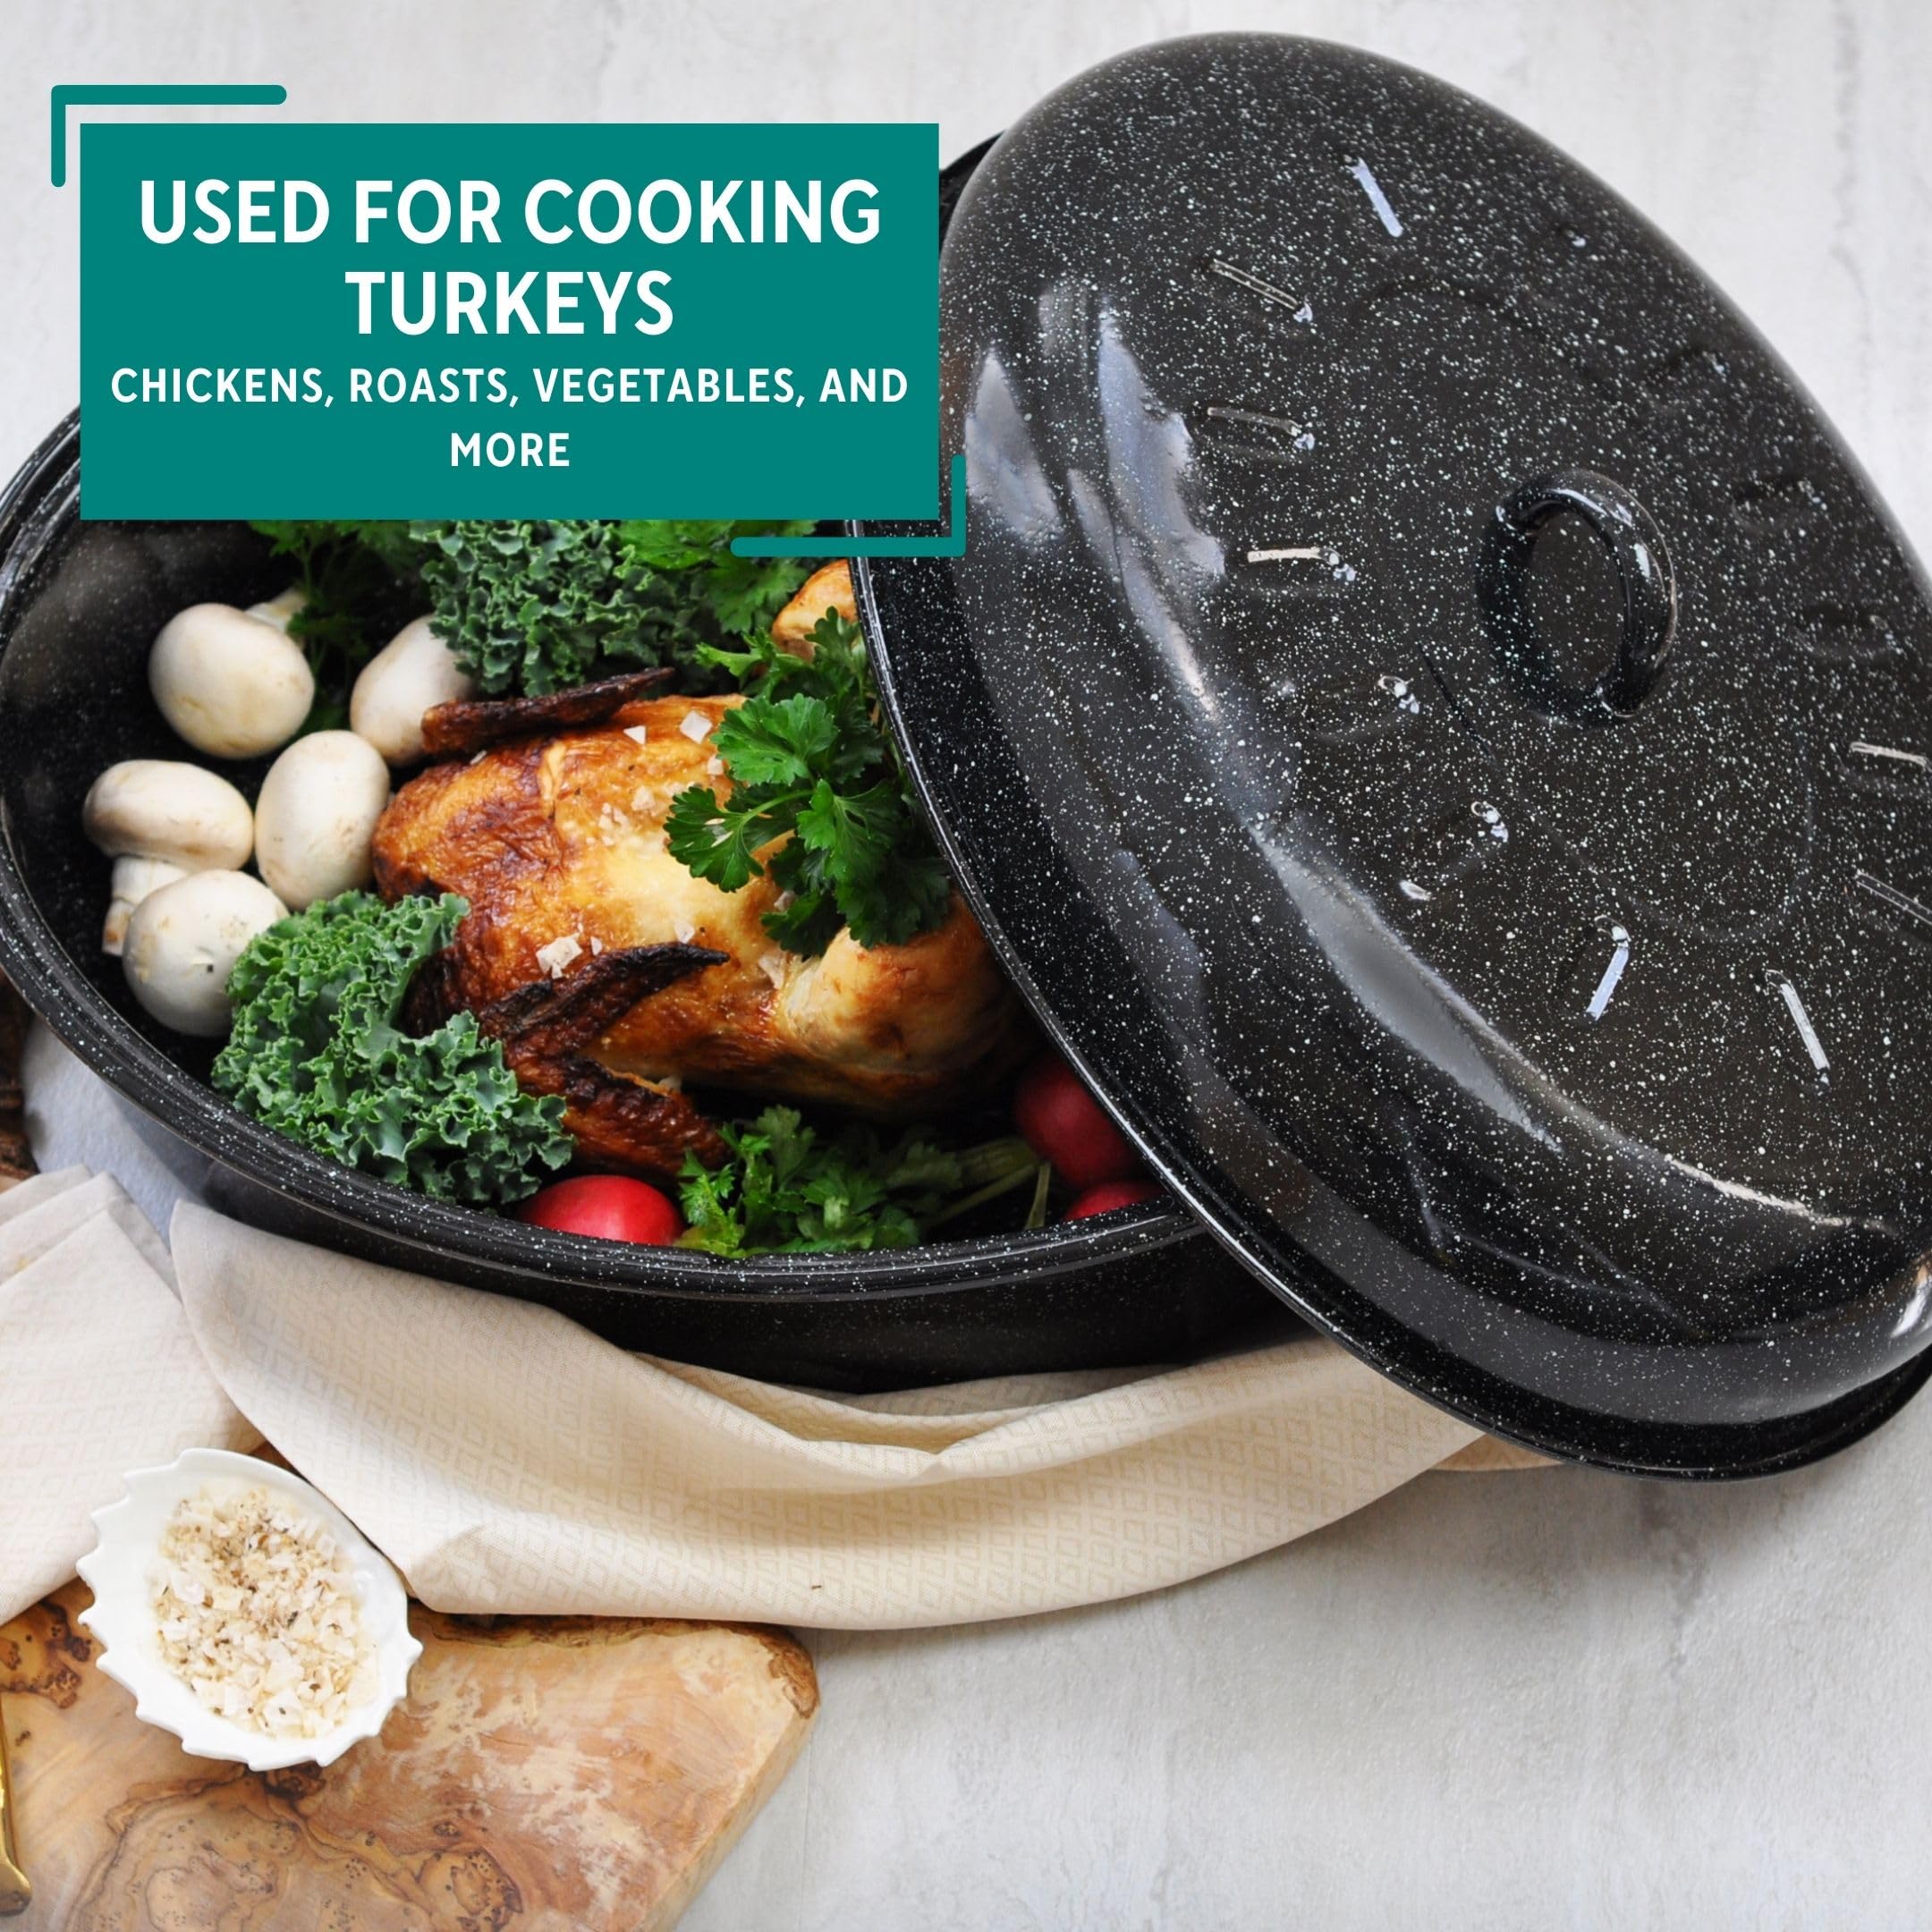 Mirro 15" Black Covered Oval Roaster with Lid for Roasting Turkey, Meats